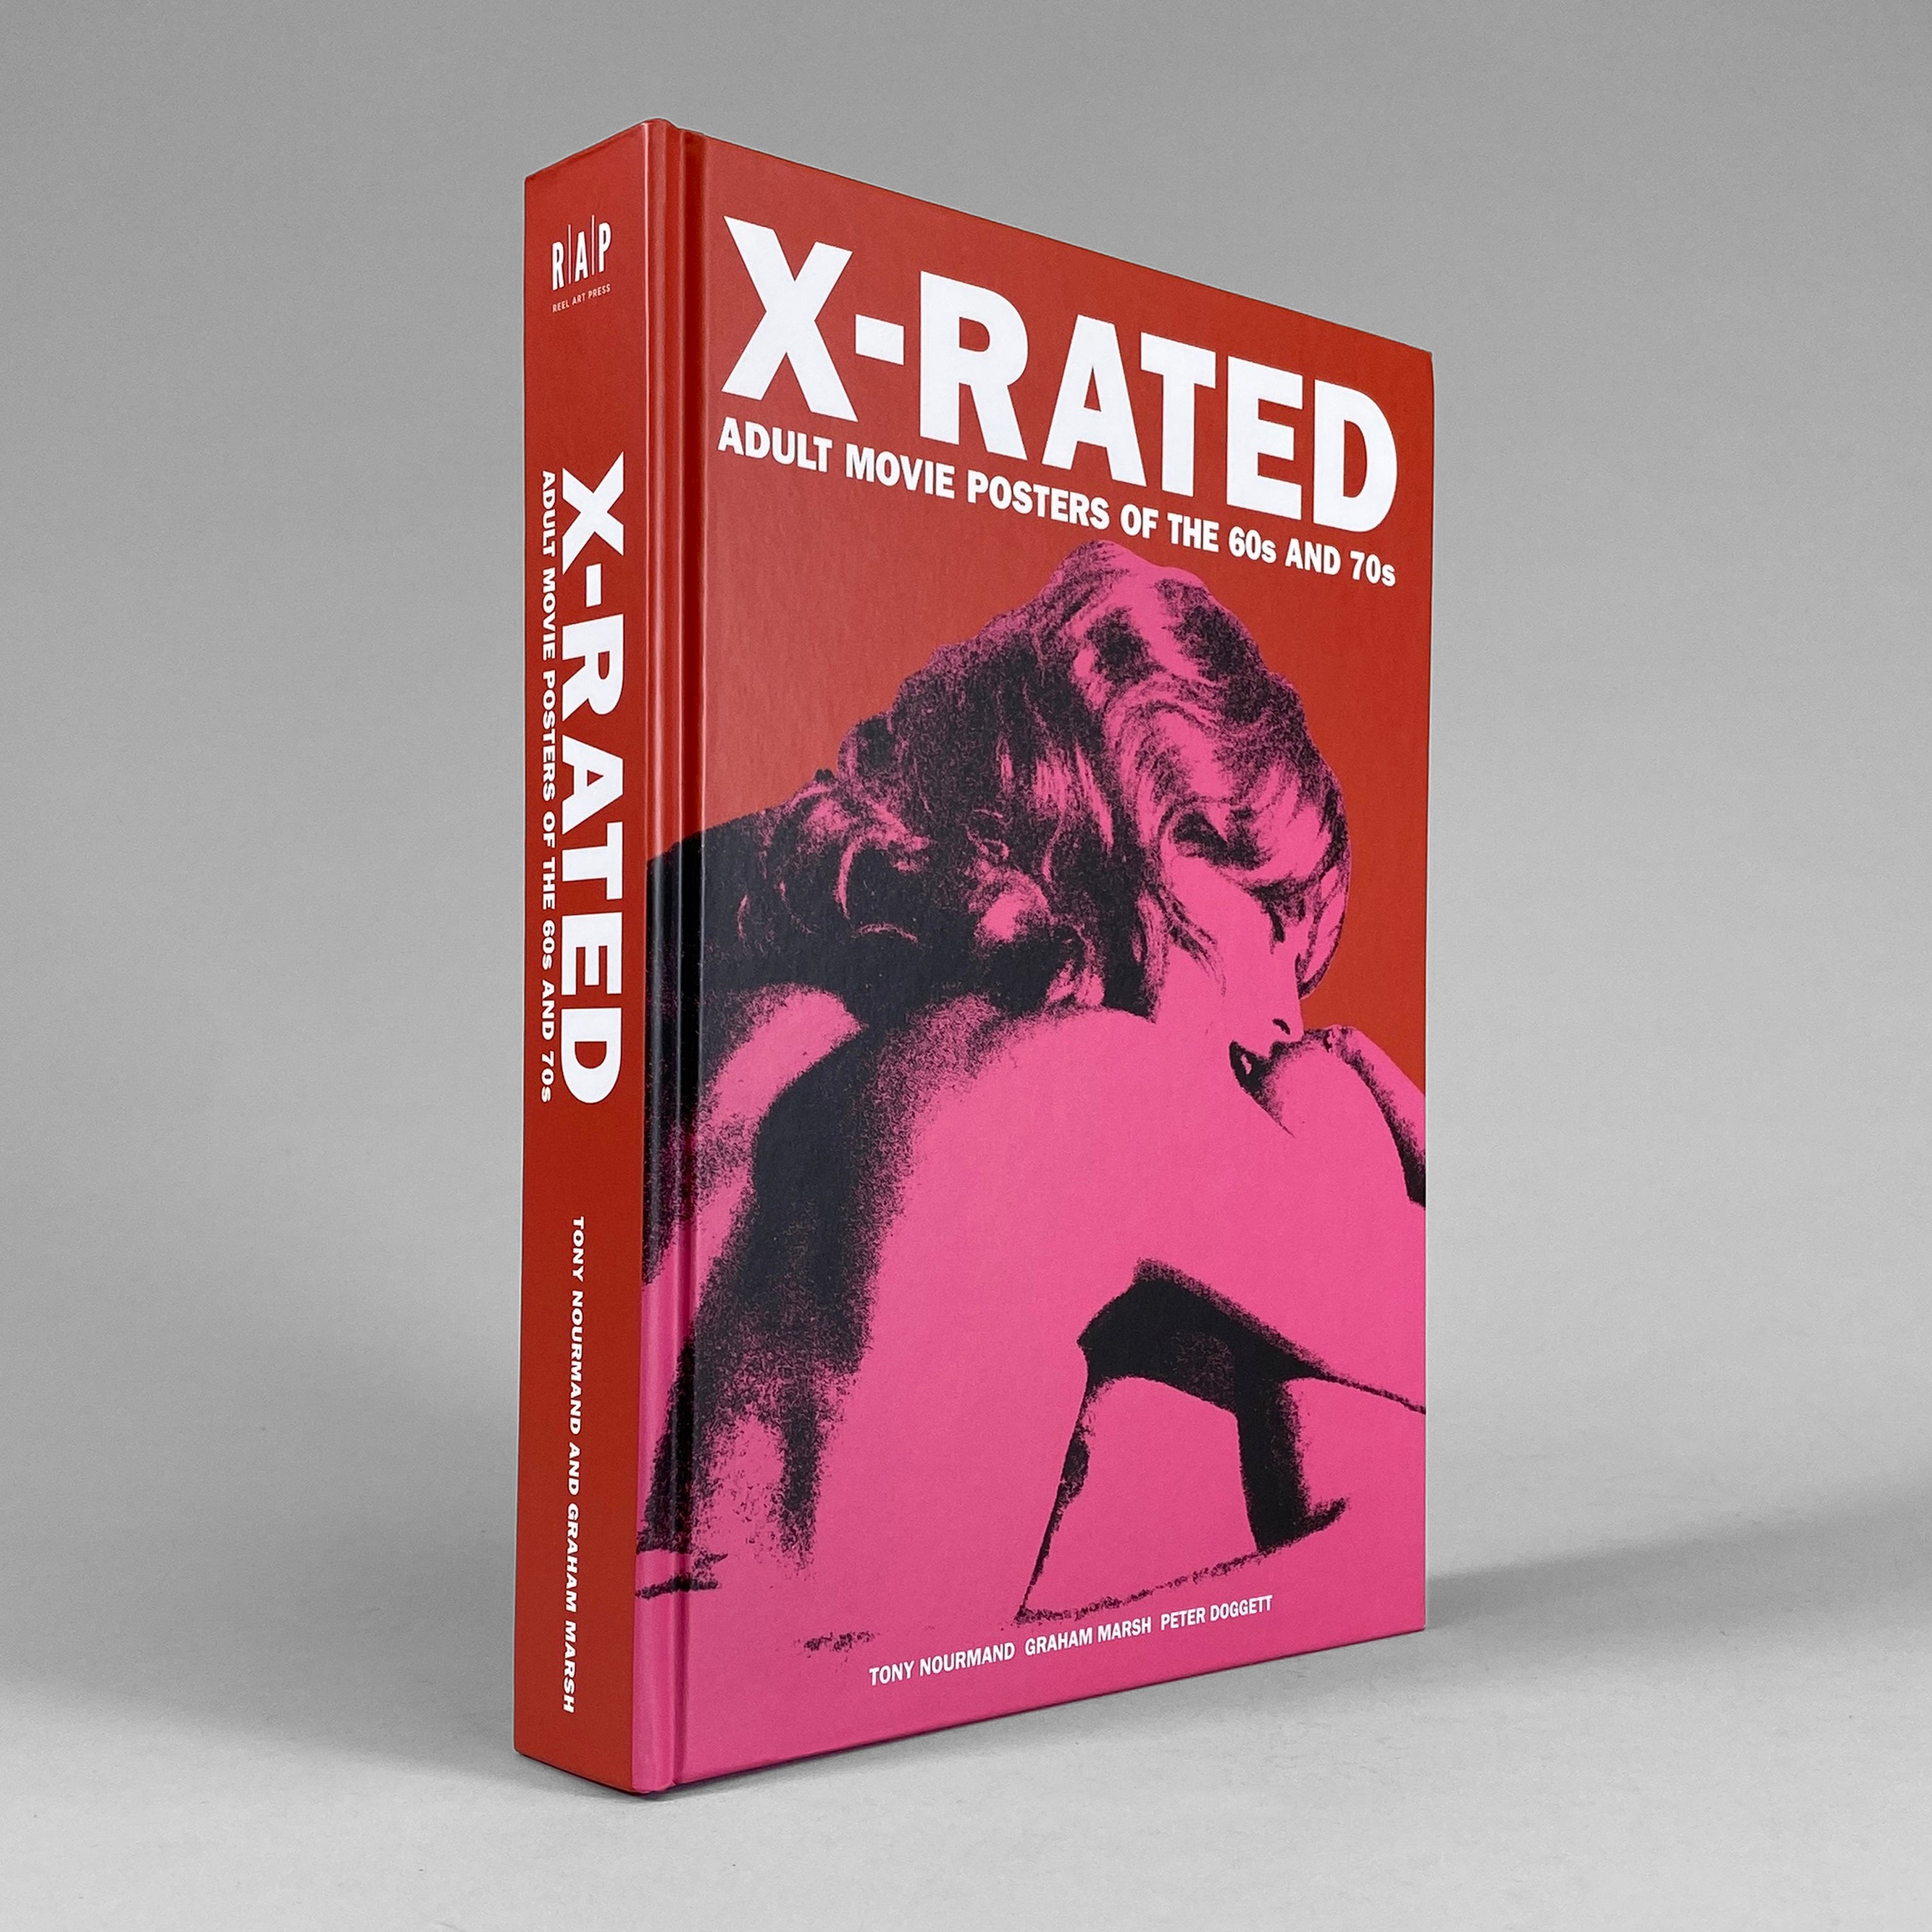 dennis hackett recommends X Rated Adult Sites